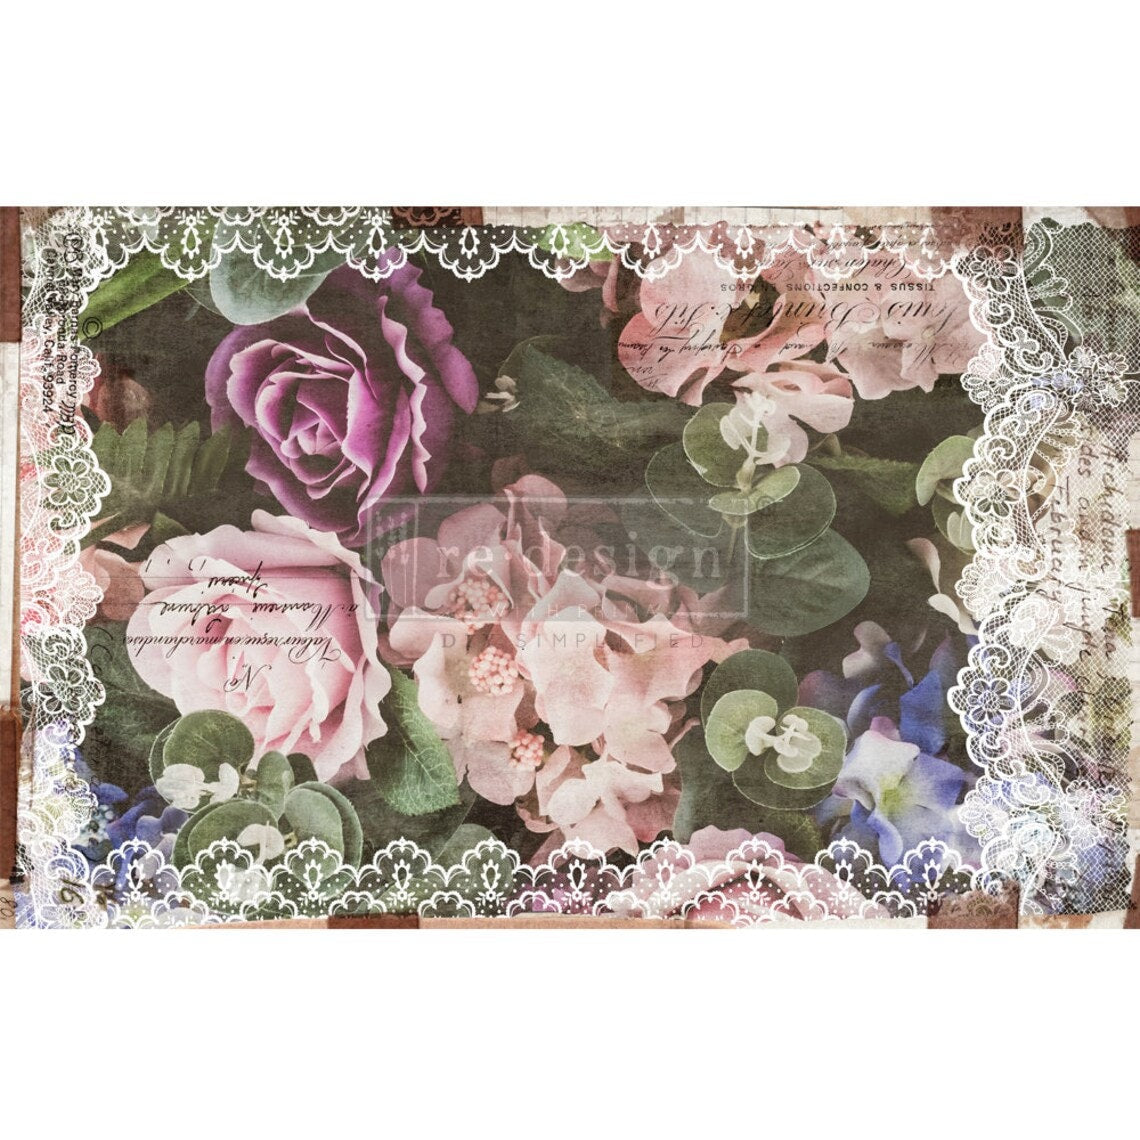 SAME DAY Shipping! Dark Lace Floral Decoupage tissue paper 1 sheet Redesign by Prima - belleandbeau850